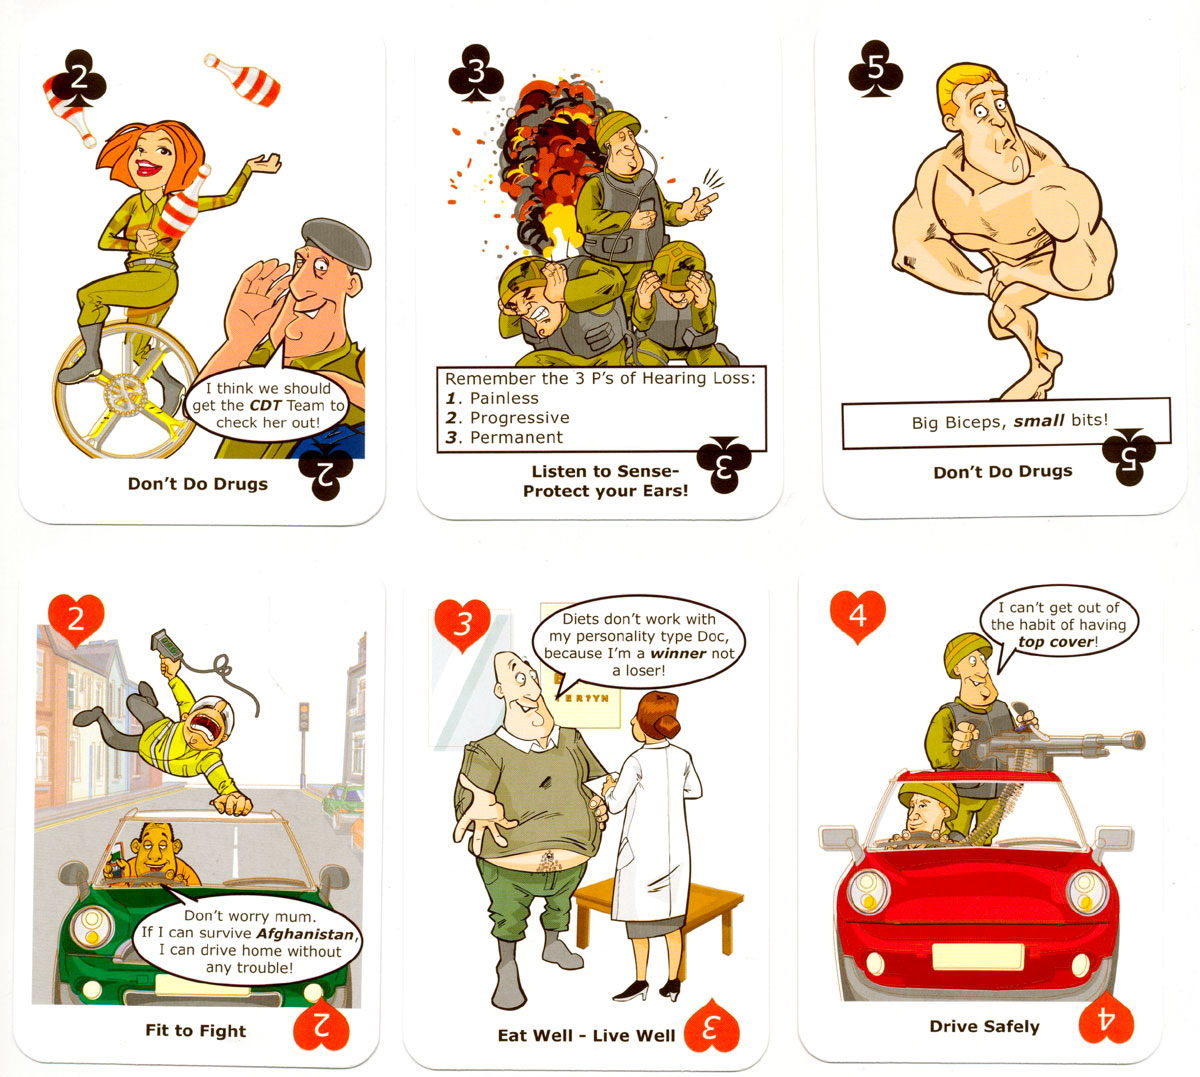 Army Health Promotion playing cards issued by the British Army, 2011